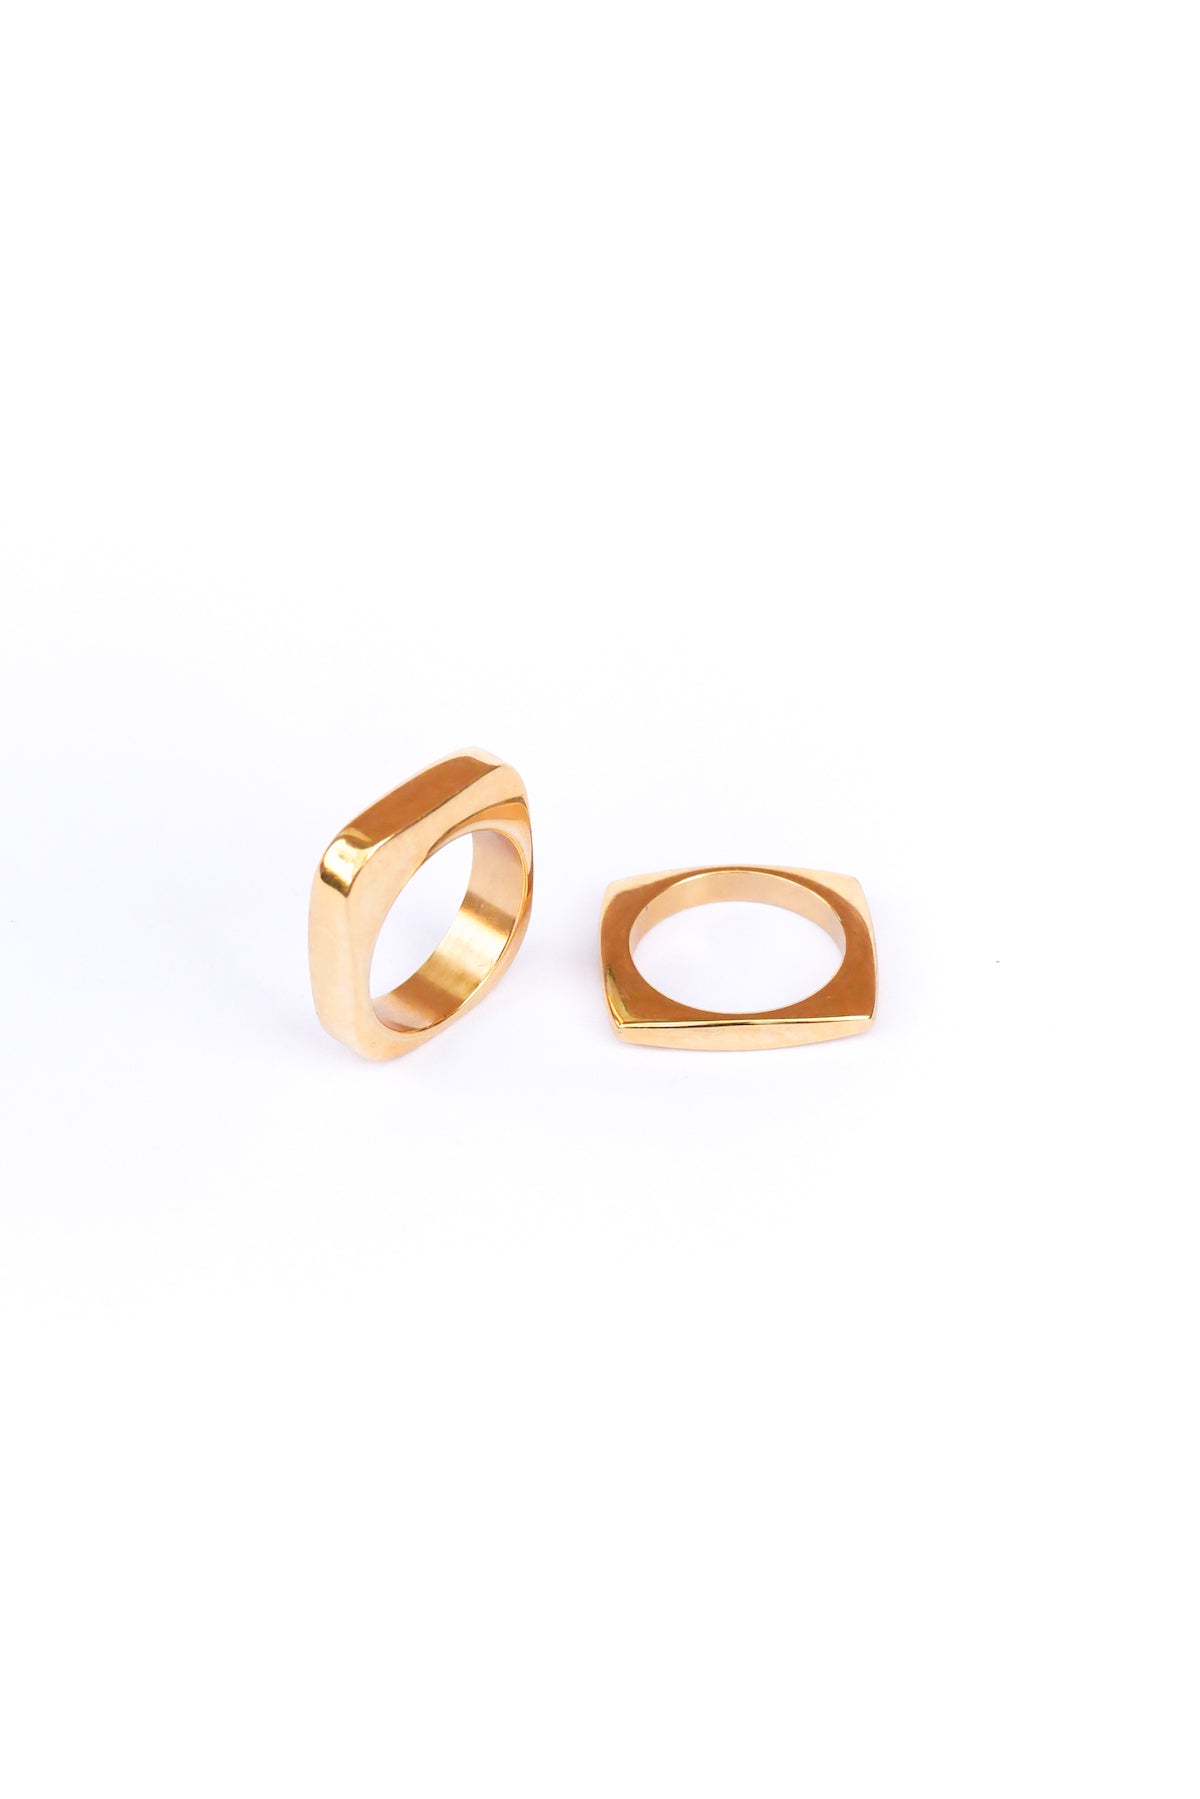 Two out of the box rings on a white backdrop one lays flat while the other stands on its side